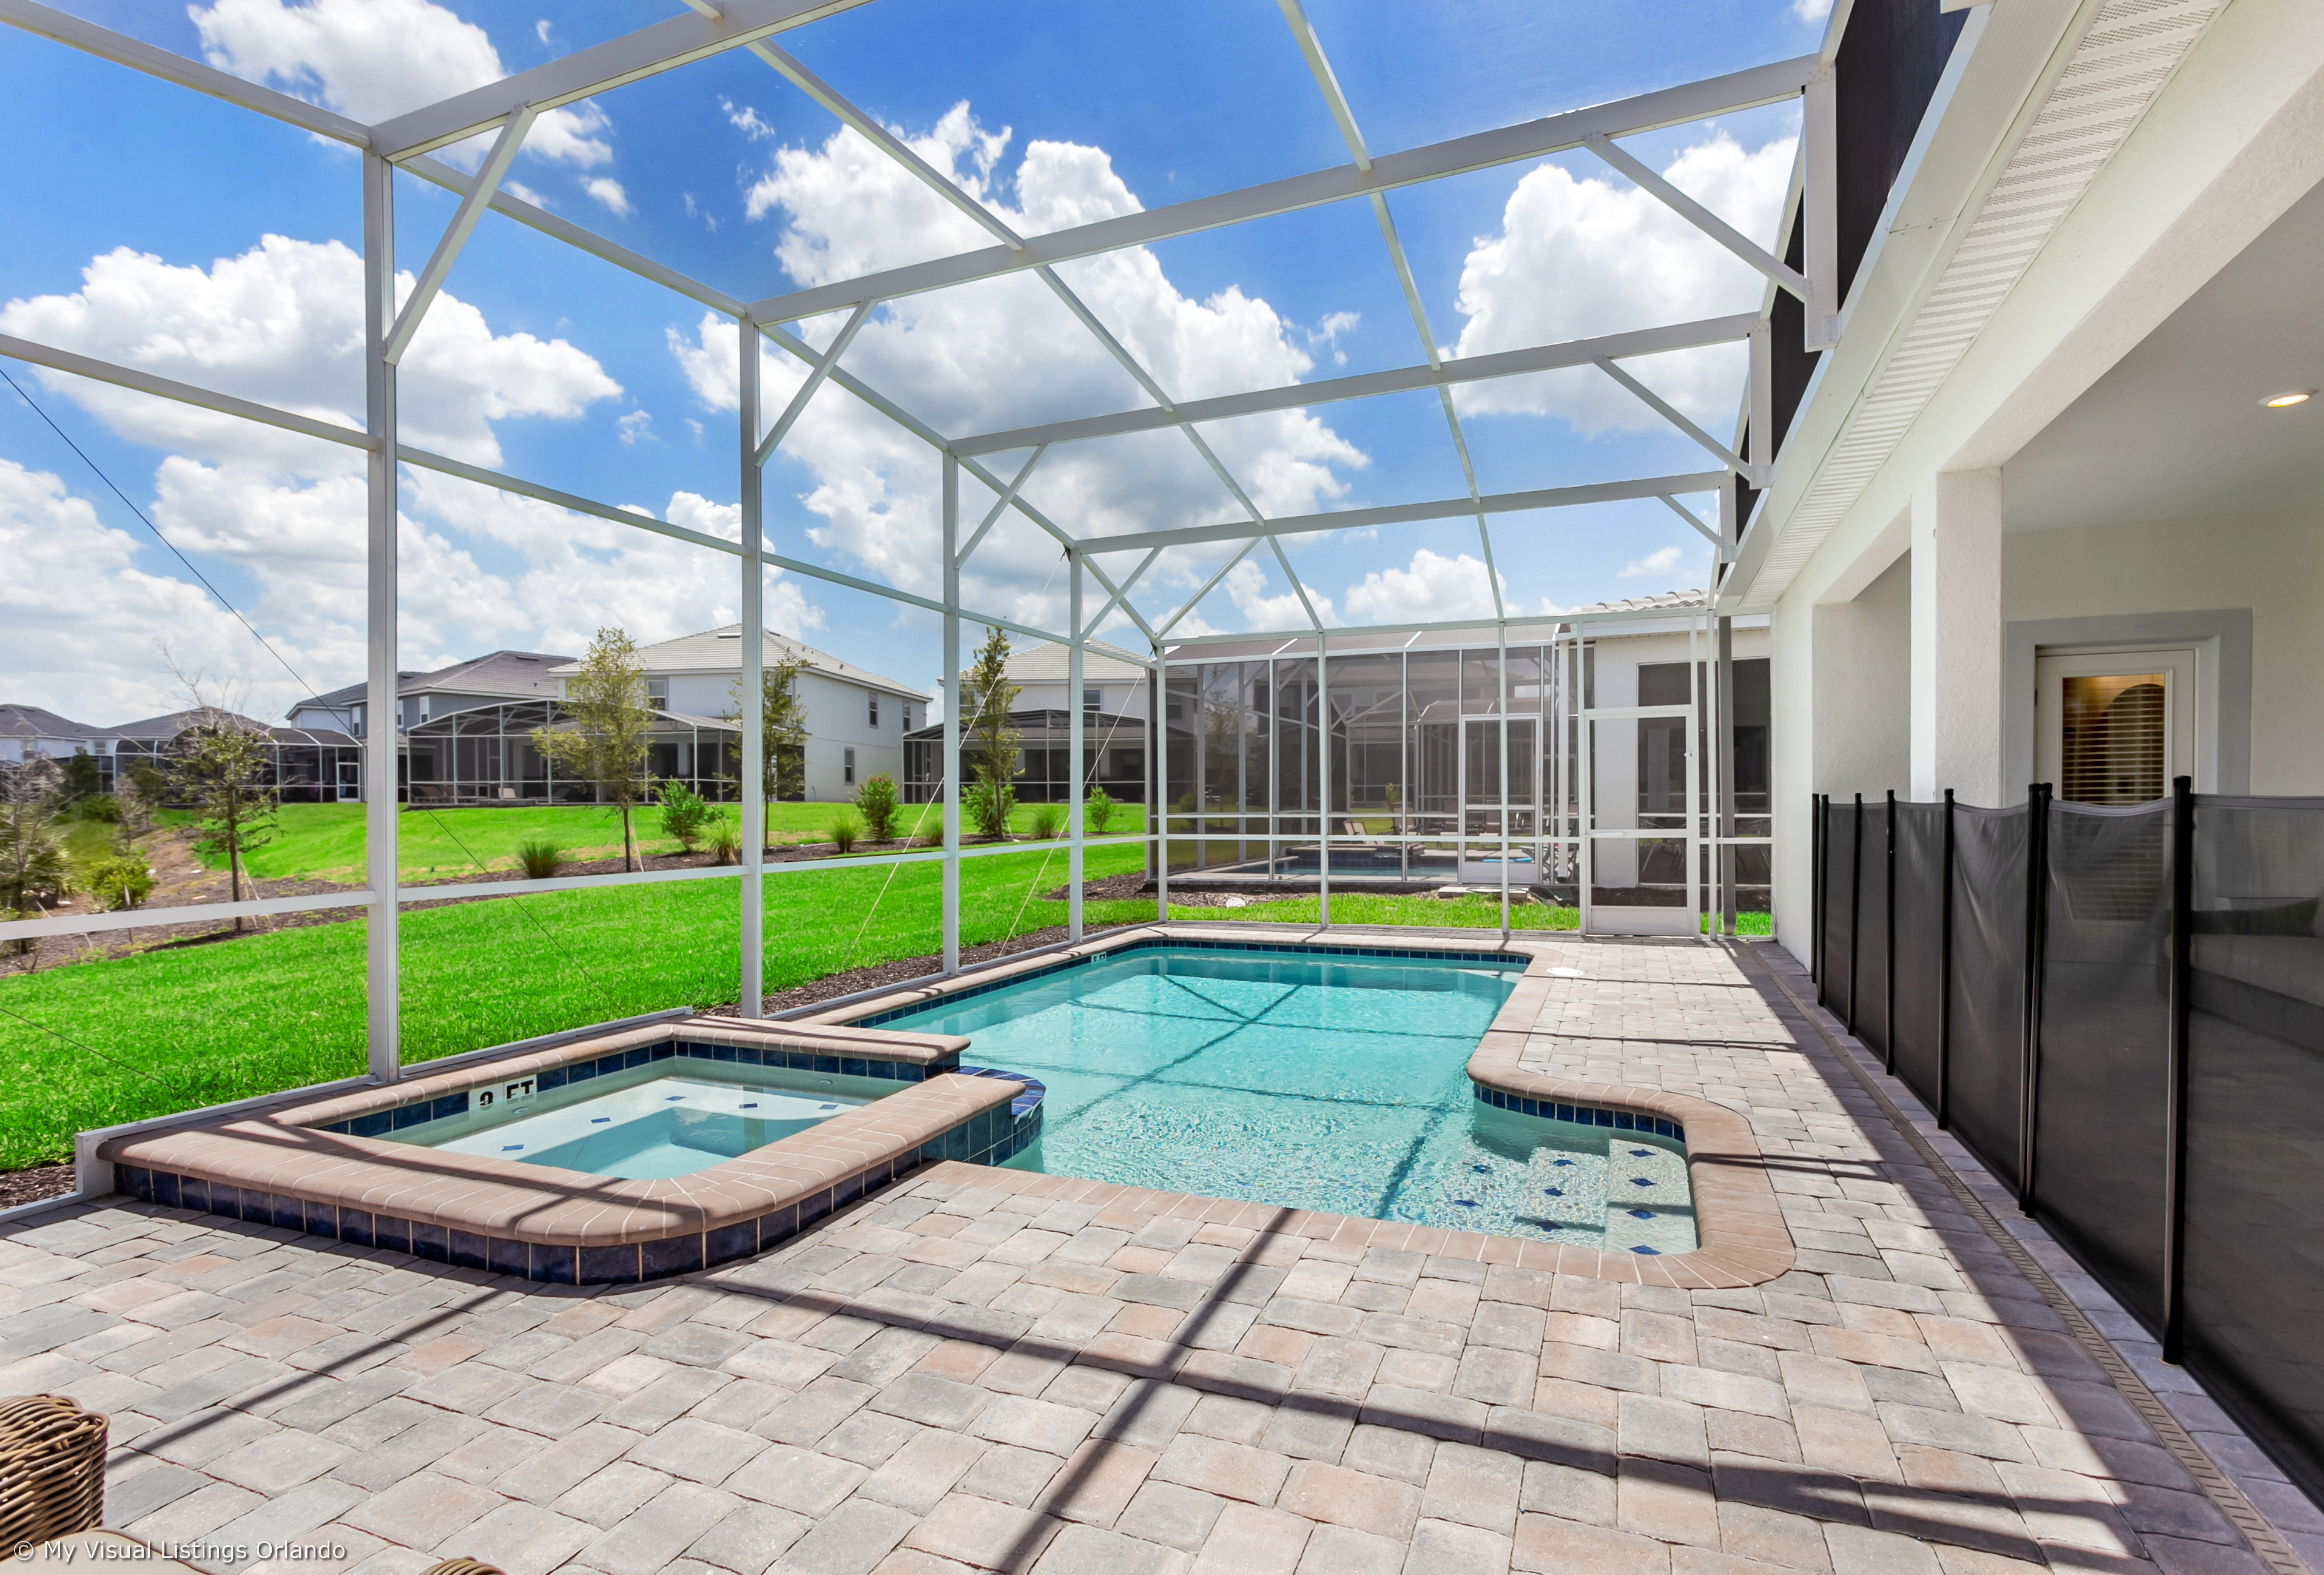 - The private pool of the Home in Florida - Immerse yourself in the cool elegance of pool - Discover bliss by the pool in serene setting